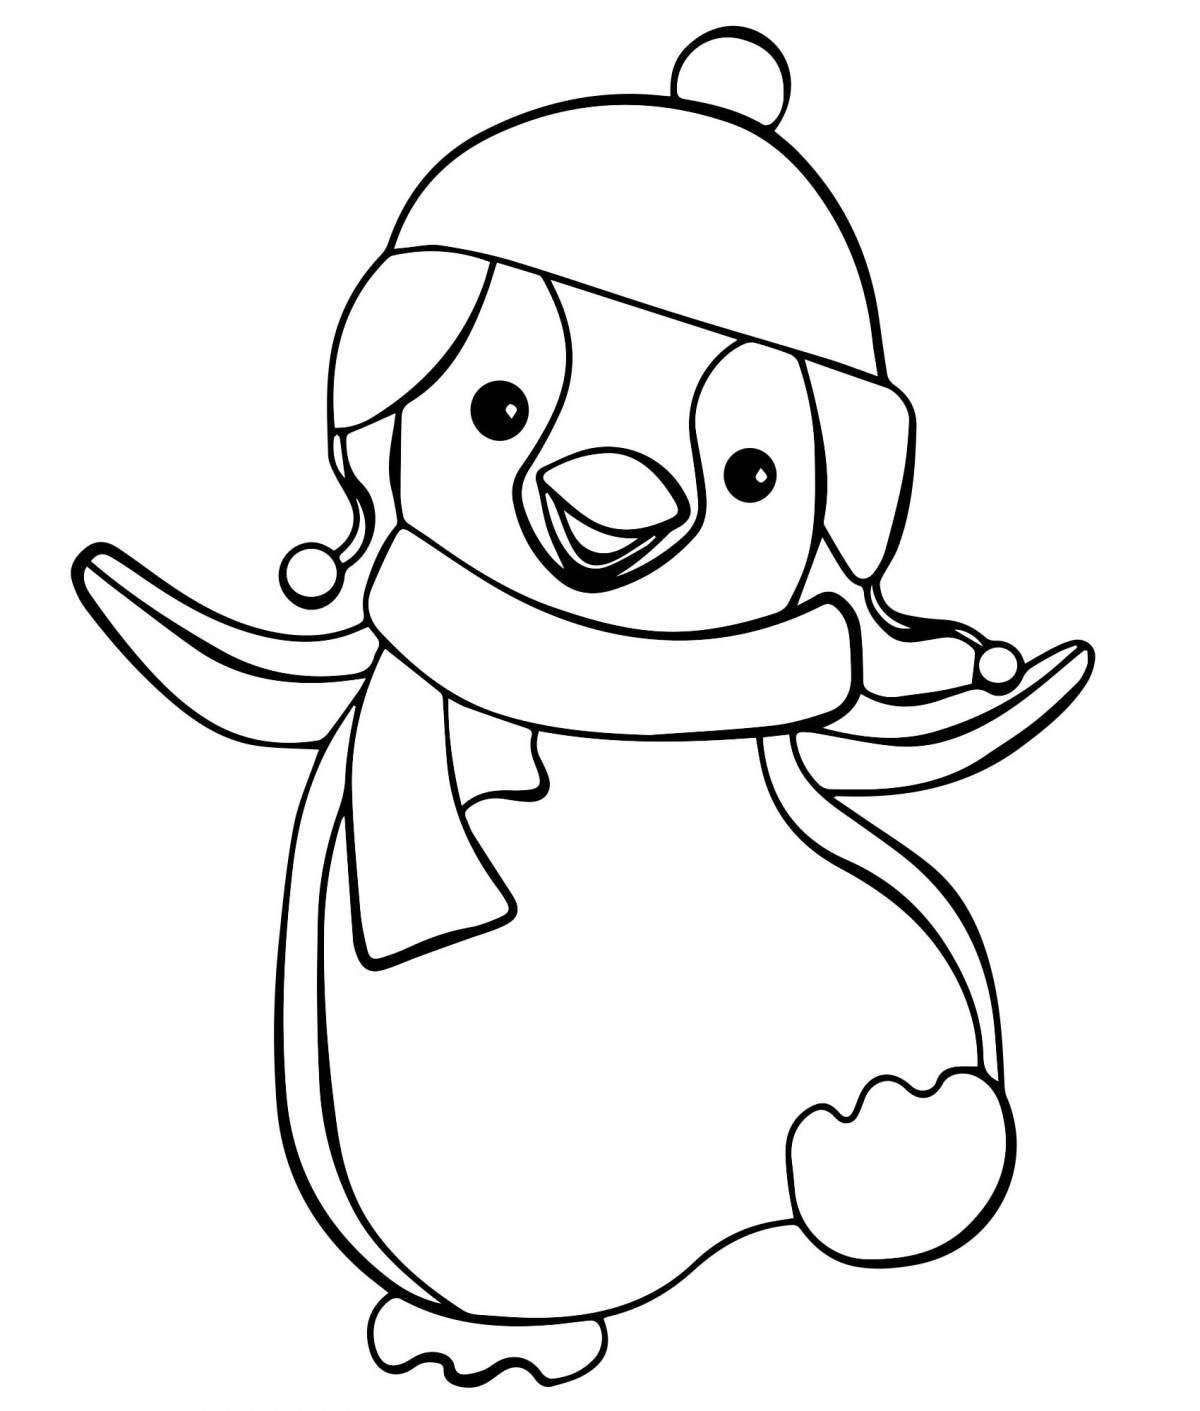 Fun penguin coloring pages